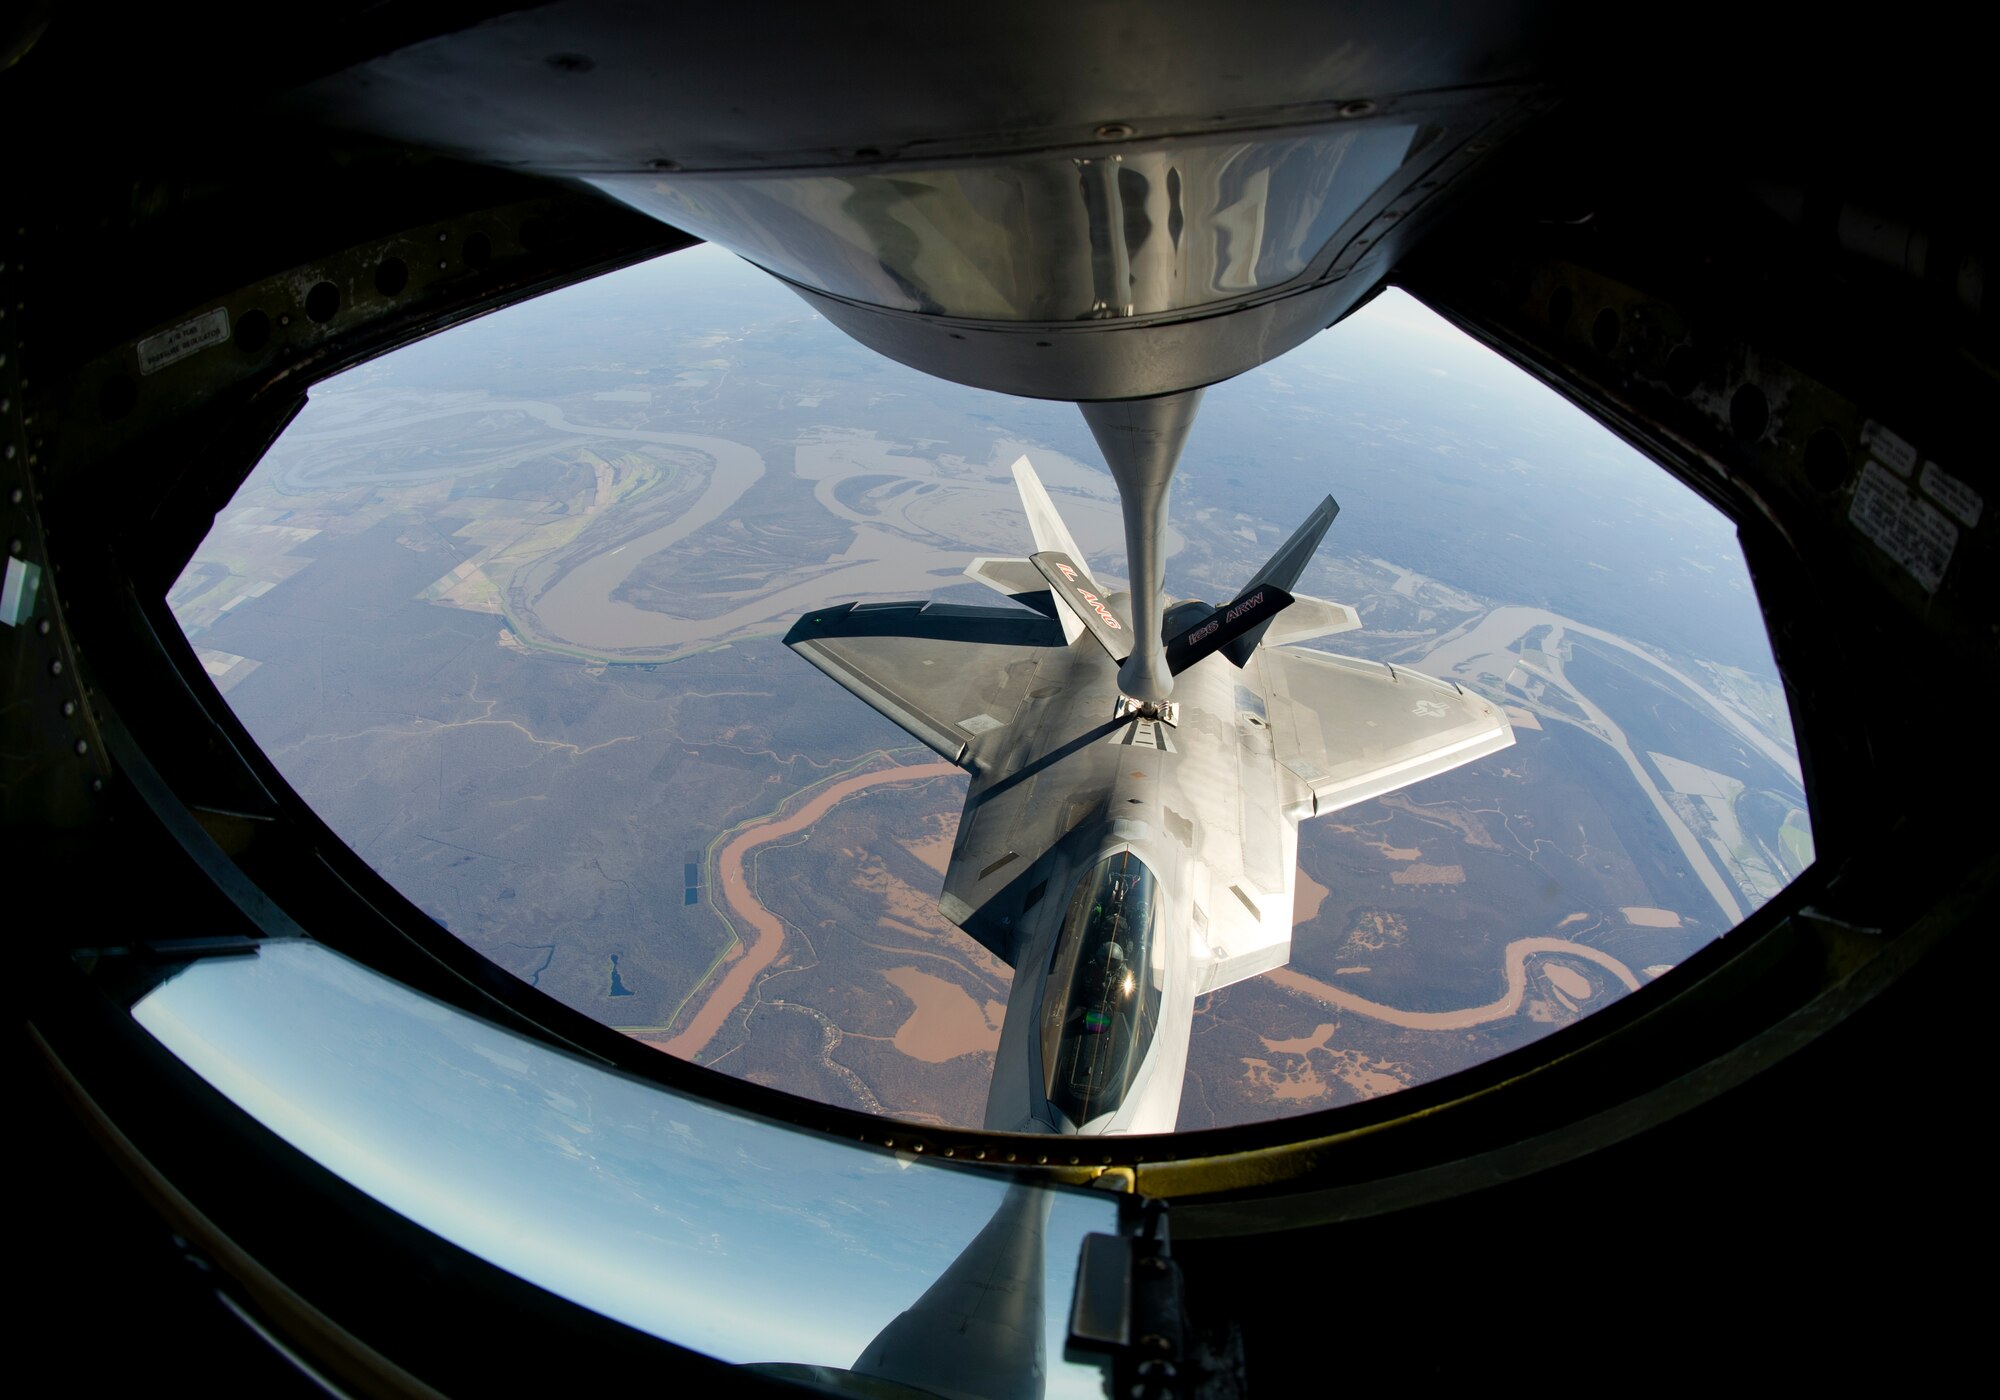 A 95th Fighter Squadron F-22 Raptor is refueled en route to Nellis AFB by a KC-135 Stratotanker from the 126th Air Refueling Wing, Scott AFB, Illinois, Jan. 19. Twelve F-22’s and more than 200 Airmen from Tyndall are participating in Red Flag 16-1. This joint, full-spectrum exercise provides the most realistic combat training available. (U.S. Air Force photo by Senior Airman Alex Fox Echols III/Released)  